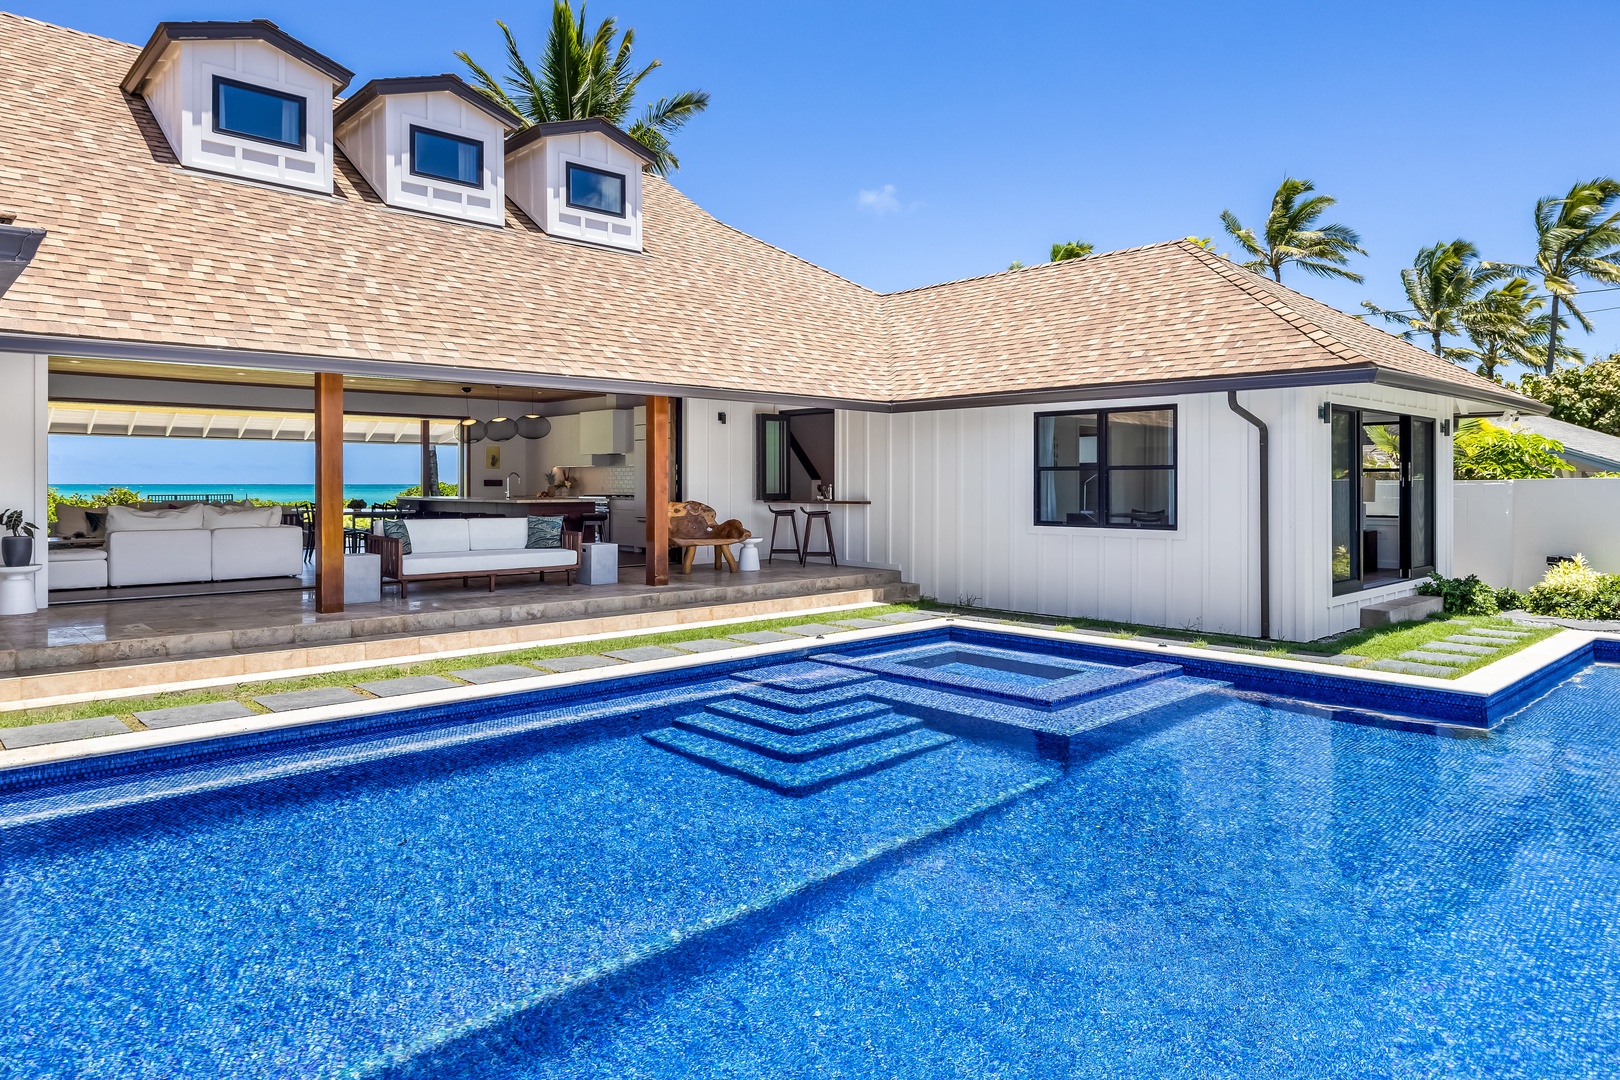 Kailua Vacation Rentals, Kailua Beach Villa - Dive into your private pool's invigorating, crystal-clear waters.